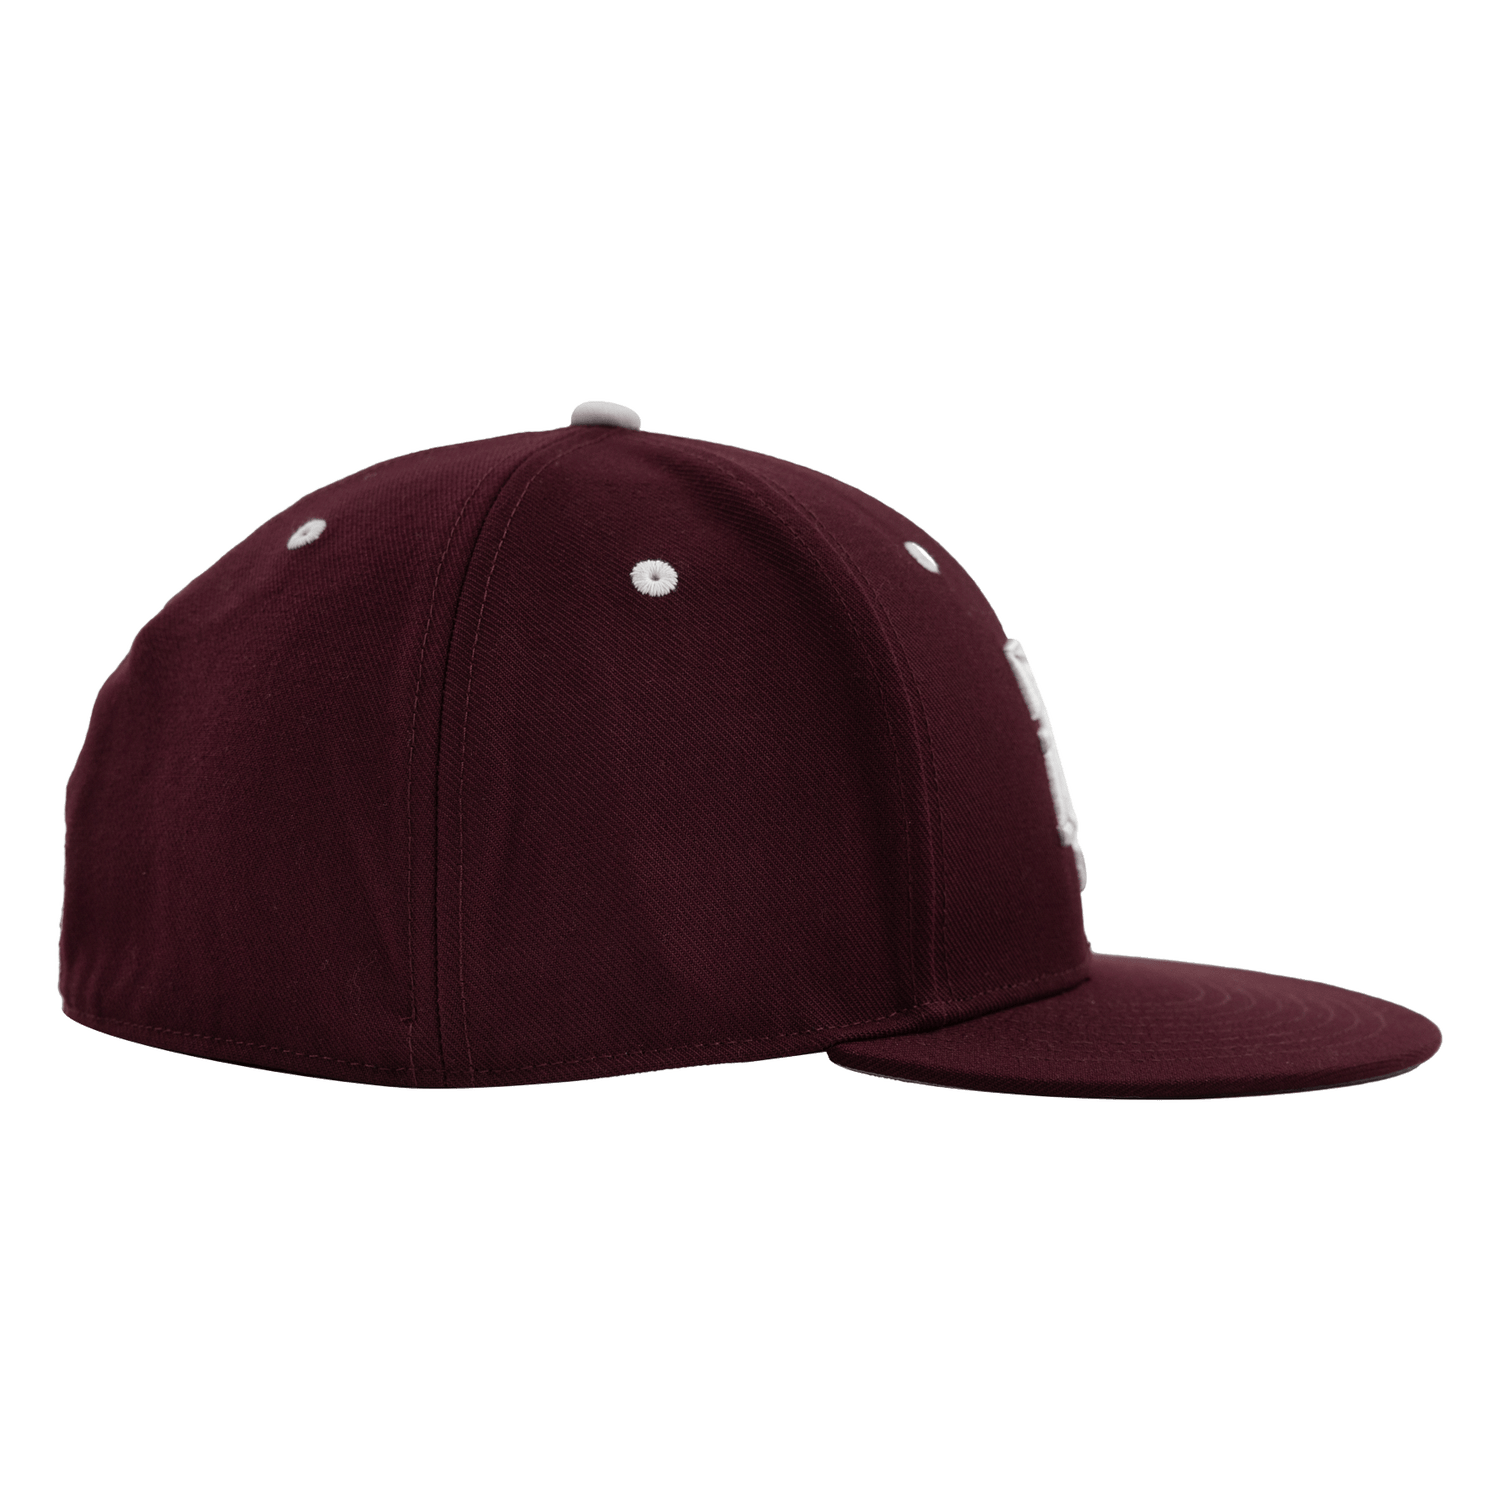 Texas A&M Adidas Fitted On-Field Baseball Cap